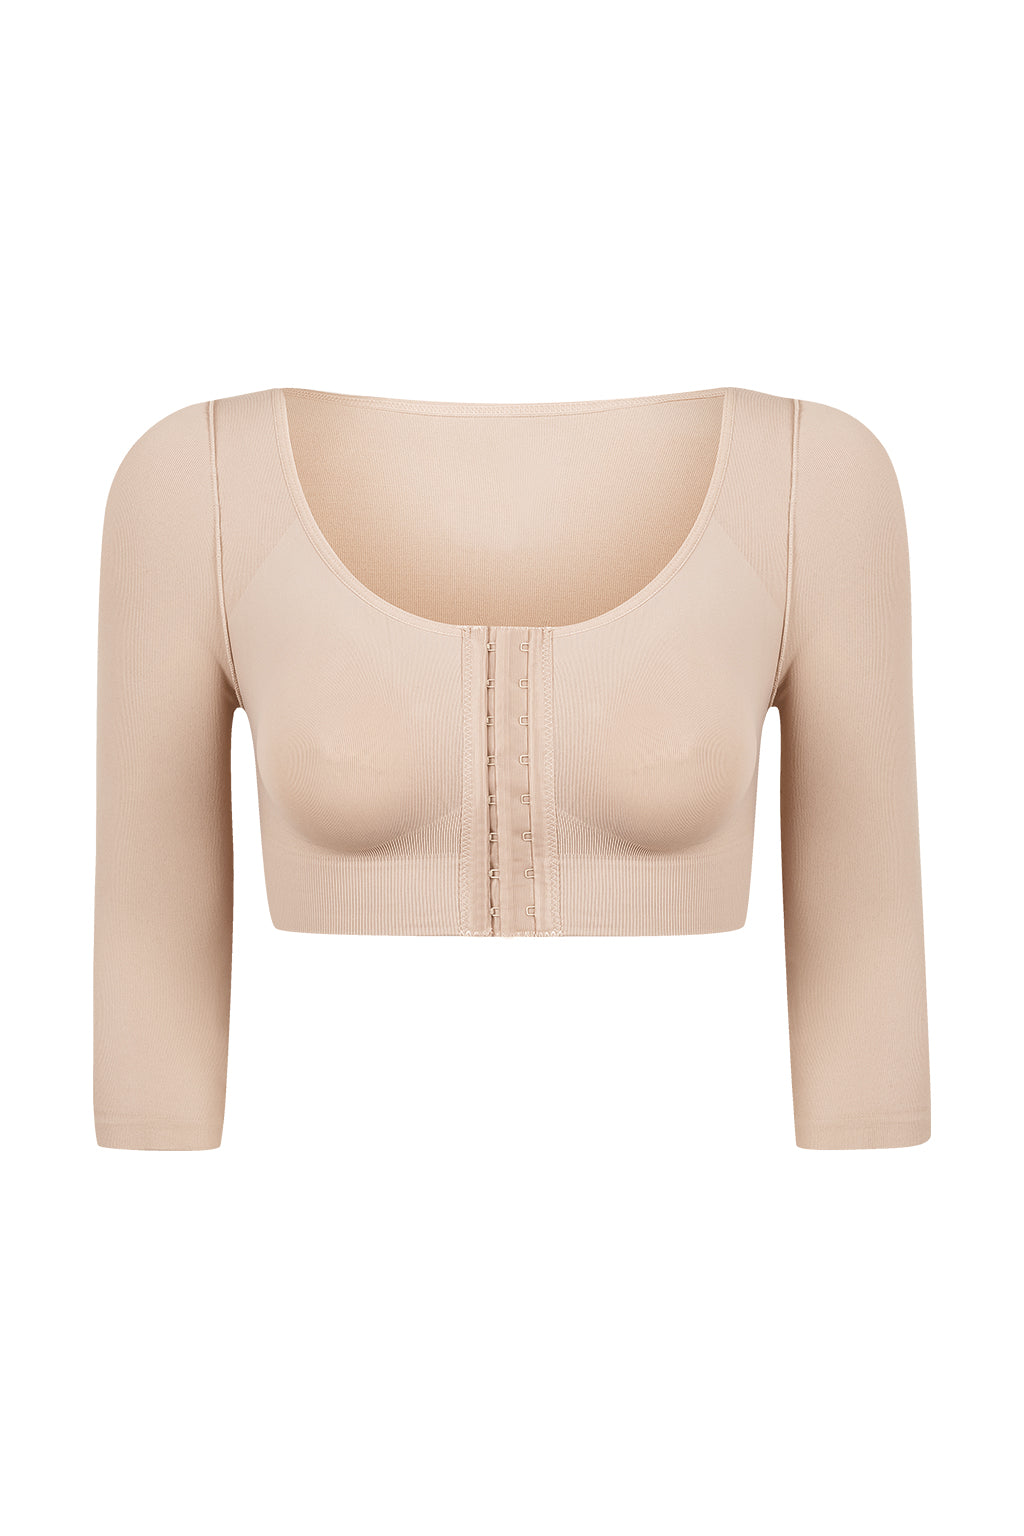 Double Compression Post-surgery top Bra with adjustable straps - METRO  BRAZIL